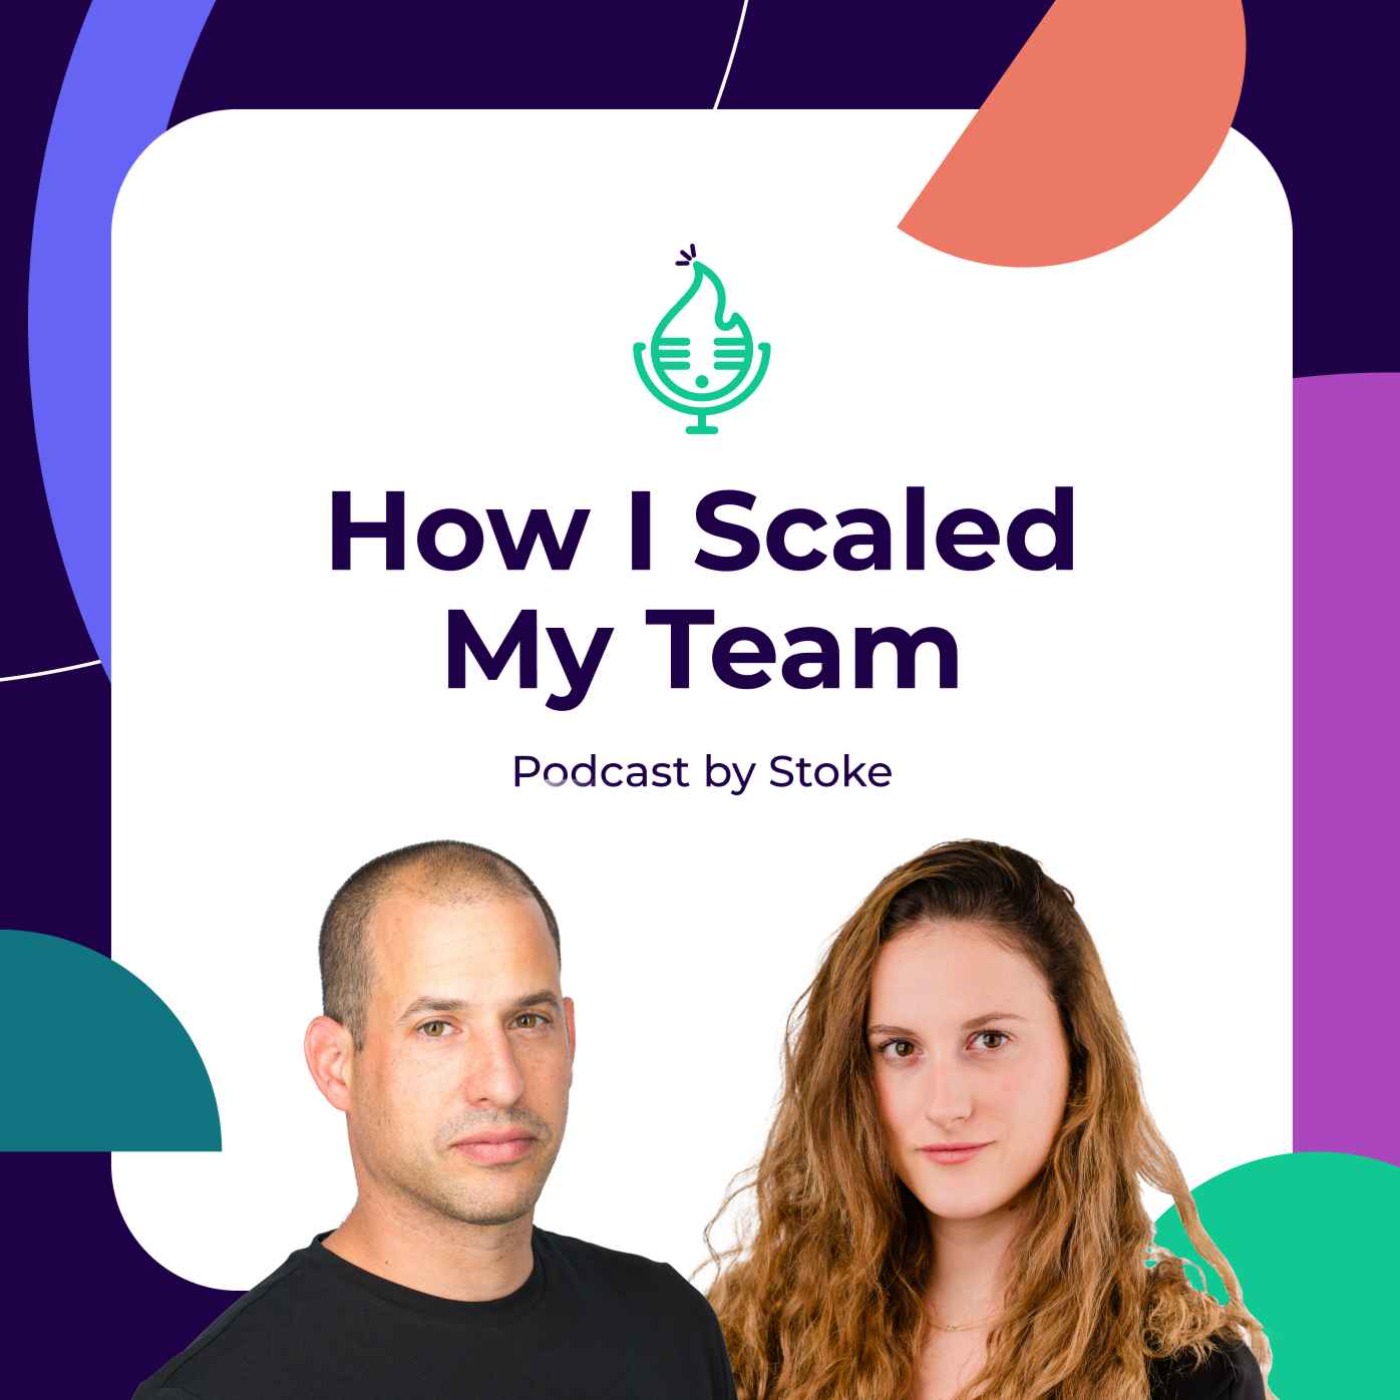 Welcome to How I Scaled My Team